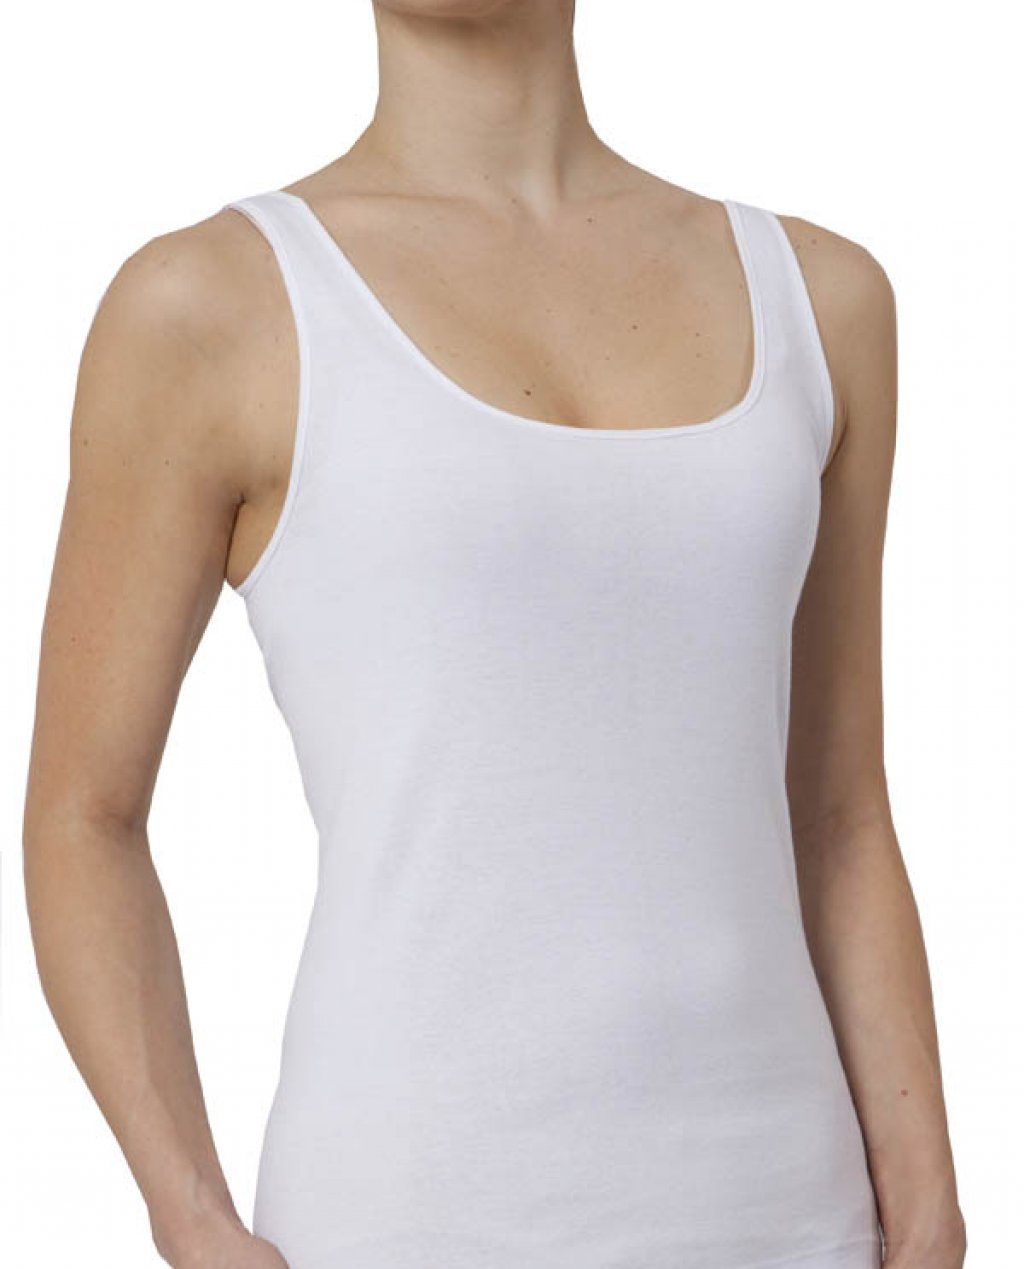 BaseLayers Soft Organic Cotton Vest J4012 - Singlets & Tanks White / 10 / S  Available at Illusions Lingerie